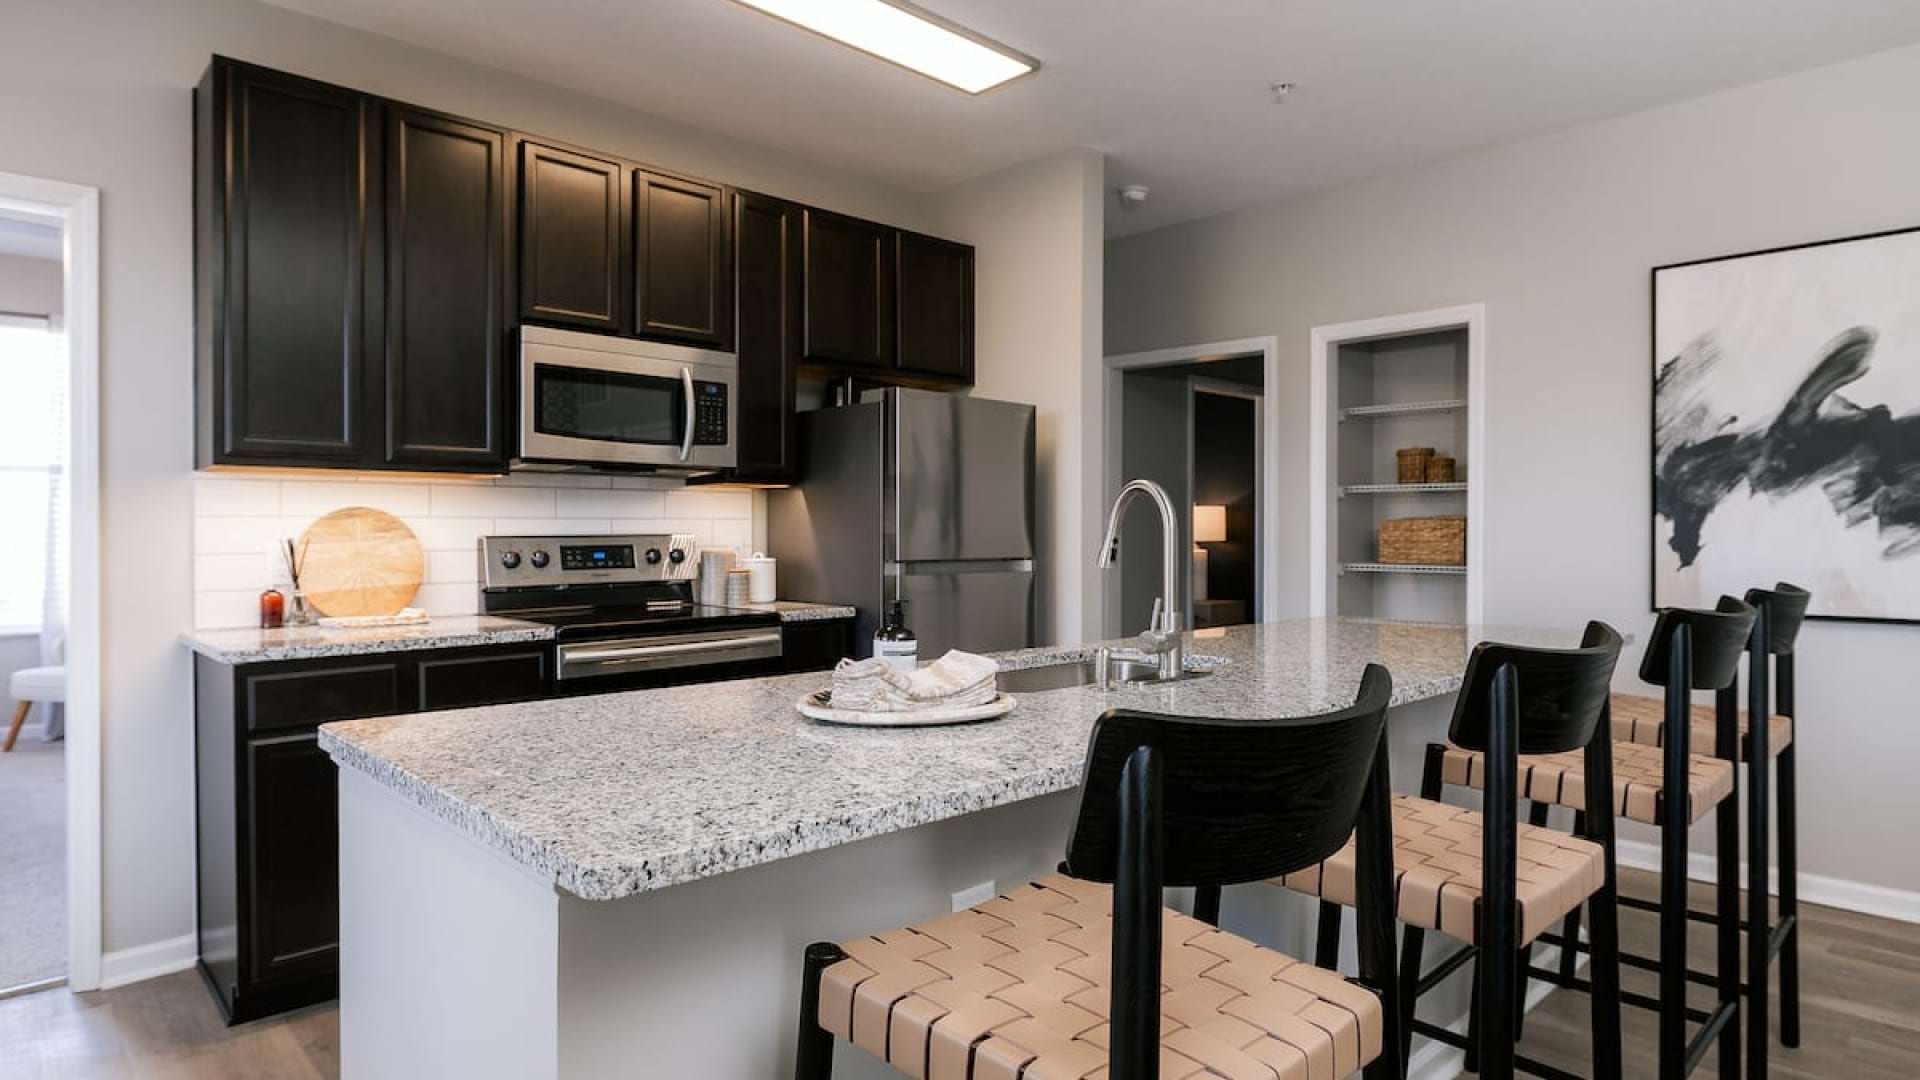 Kitchen with Expansive Island at Our Luxury Apartments in Dublin, Ohio